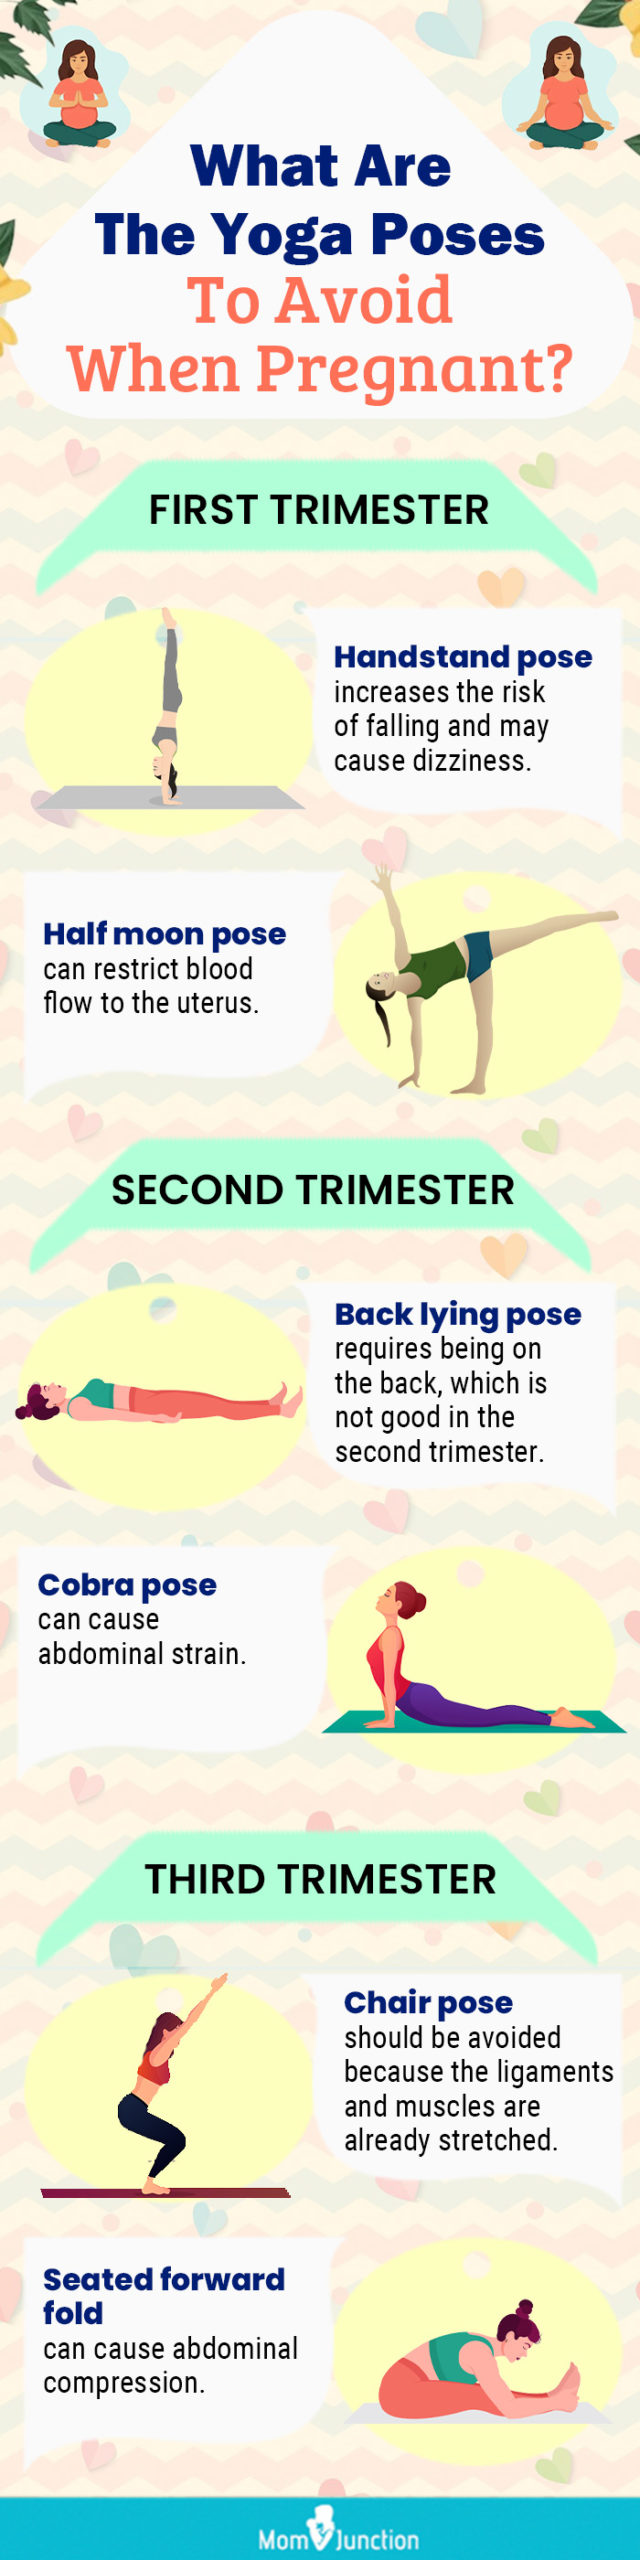 Prenatal Yoga Poses for Every Trimester | by Fabomama | Medium